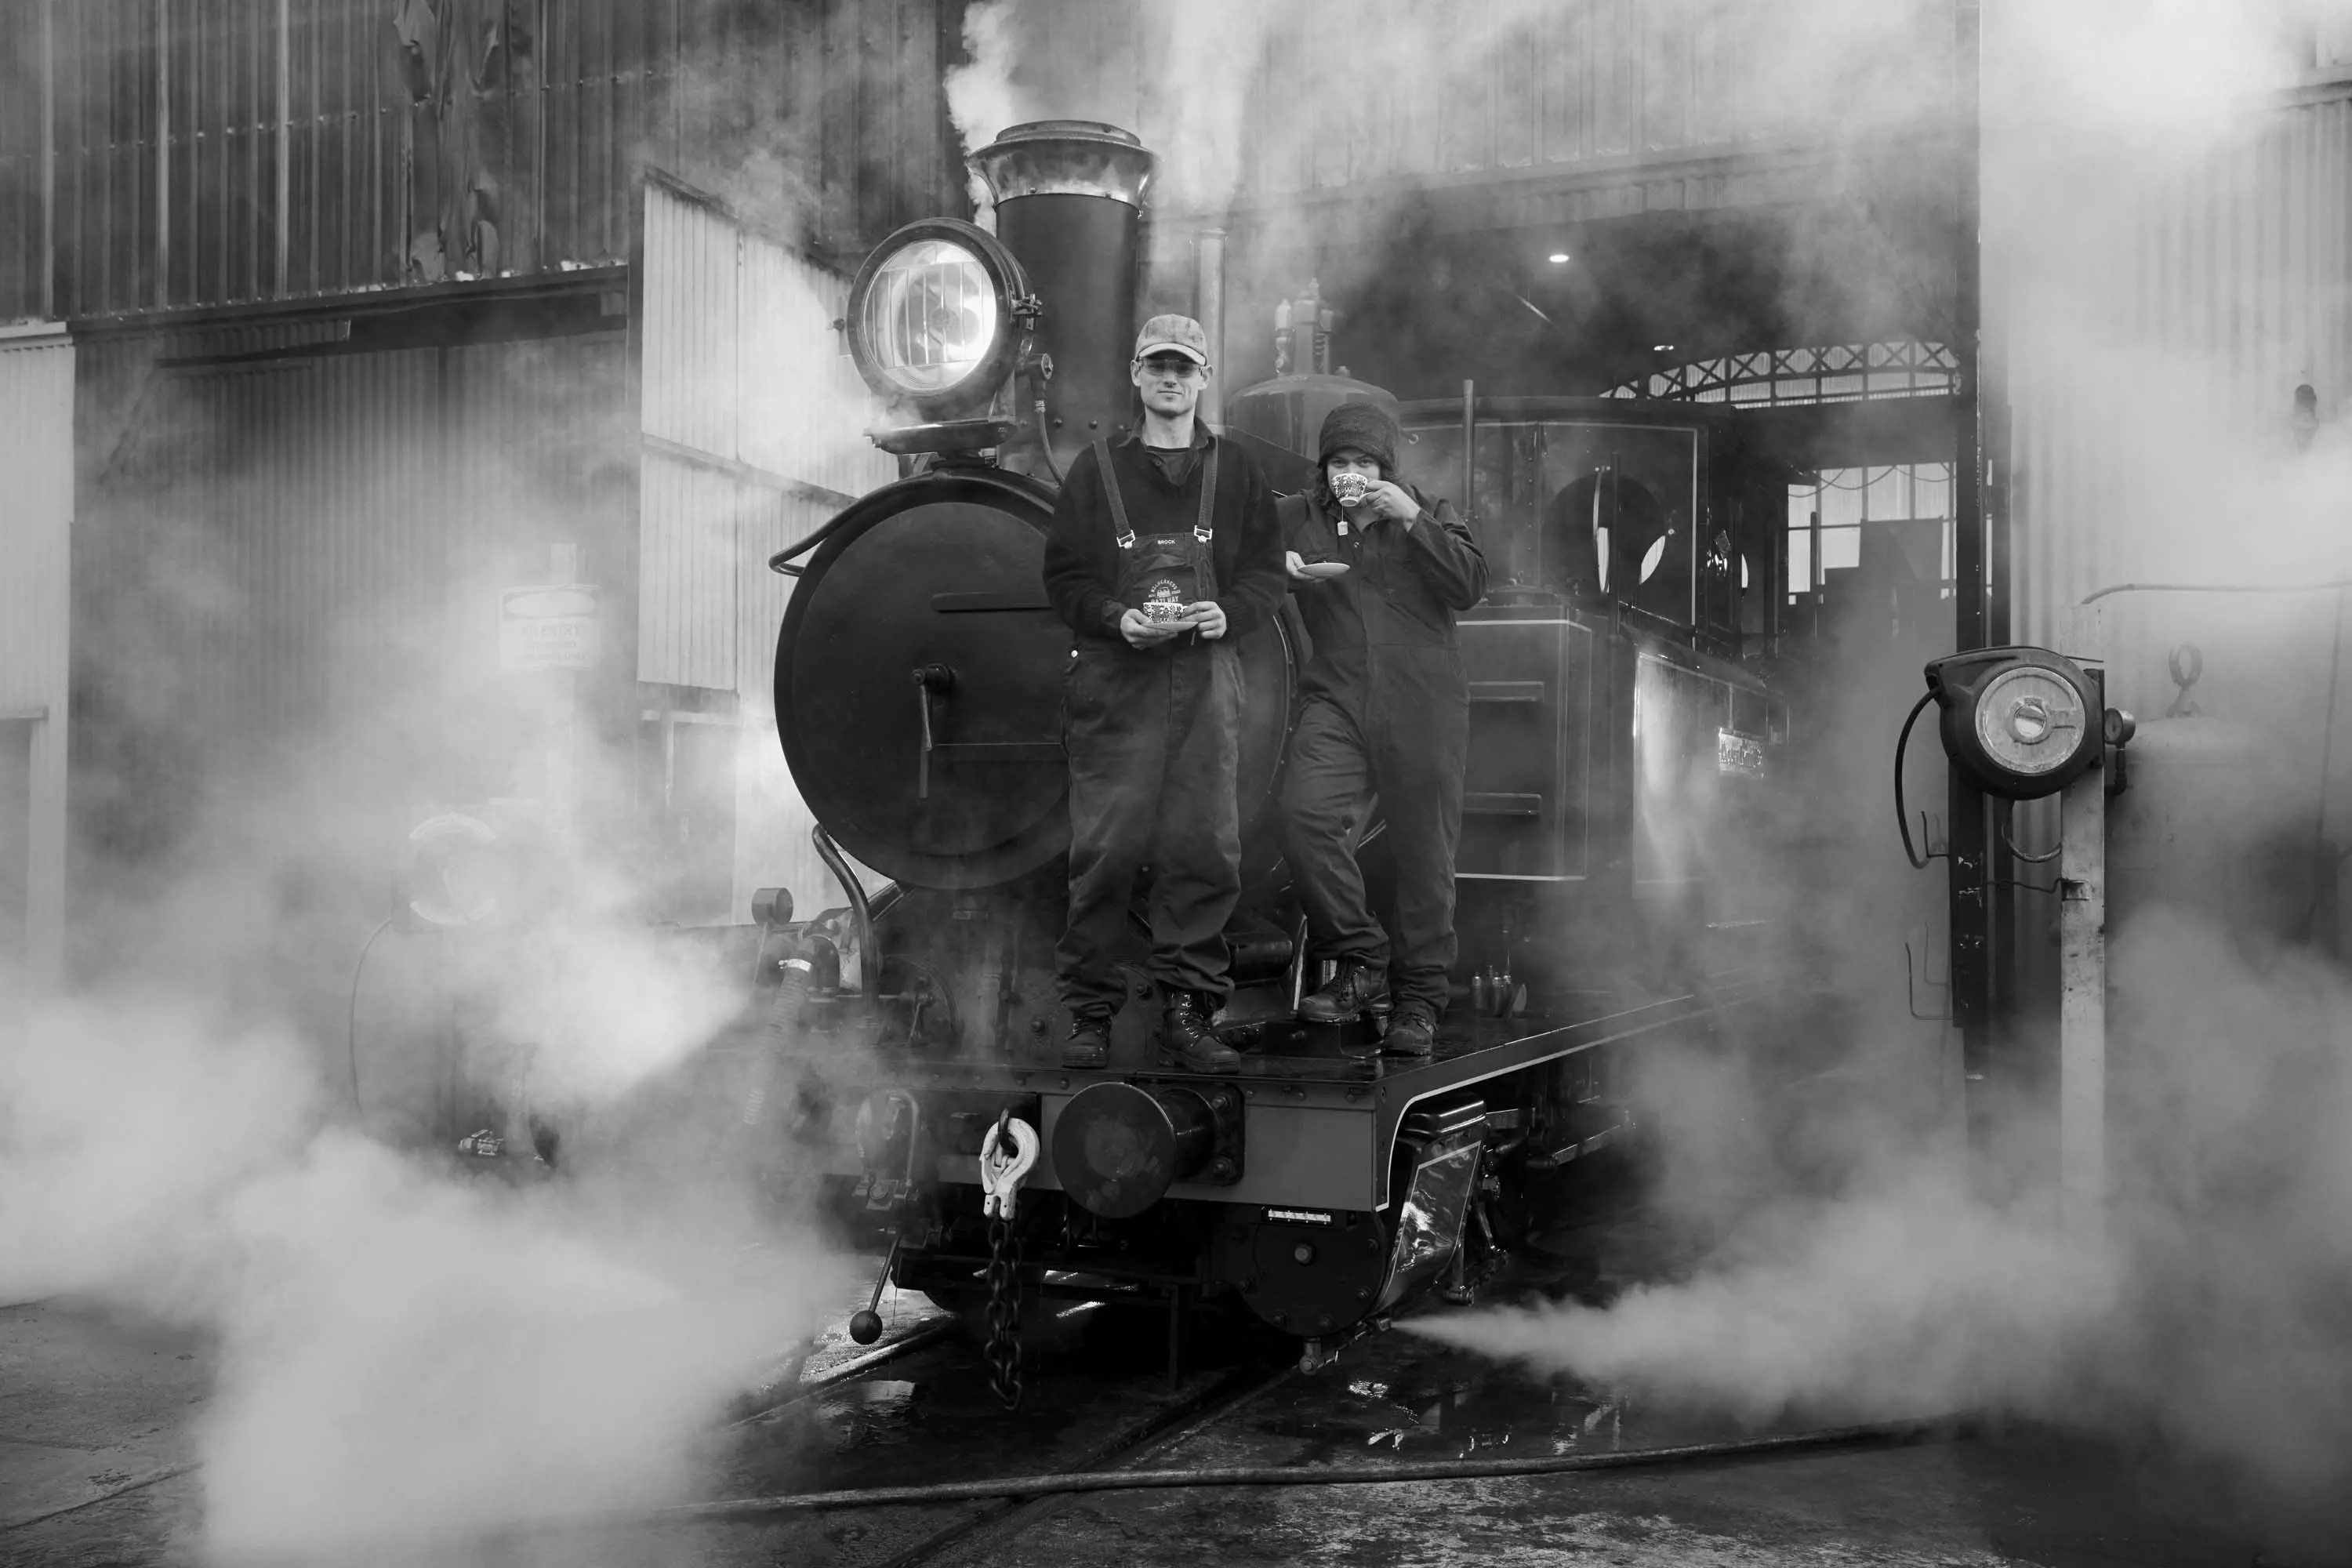 Two men stand on the front of a steam locomotive and drink tea from cups and saucers.